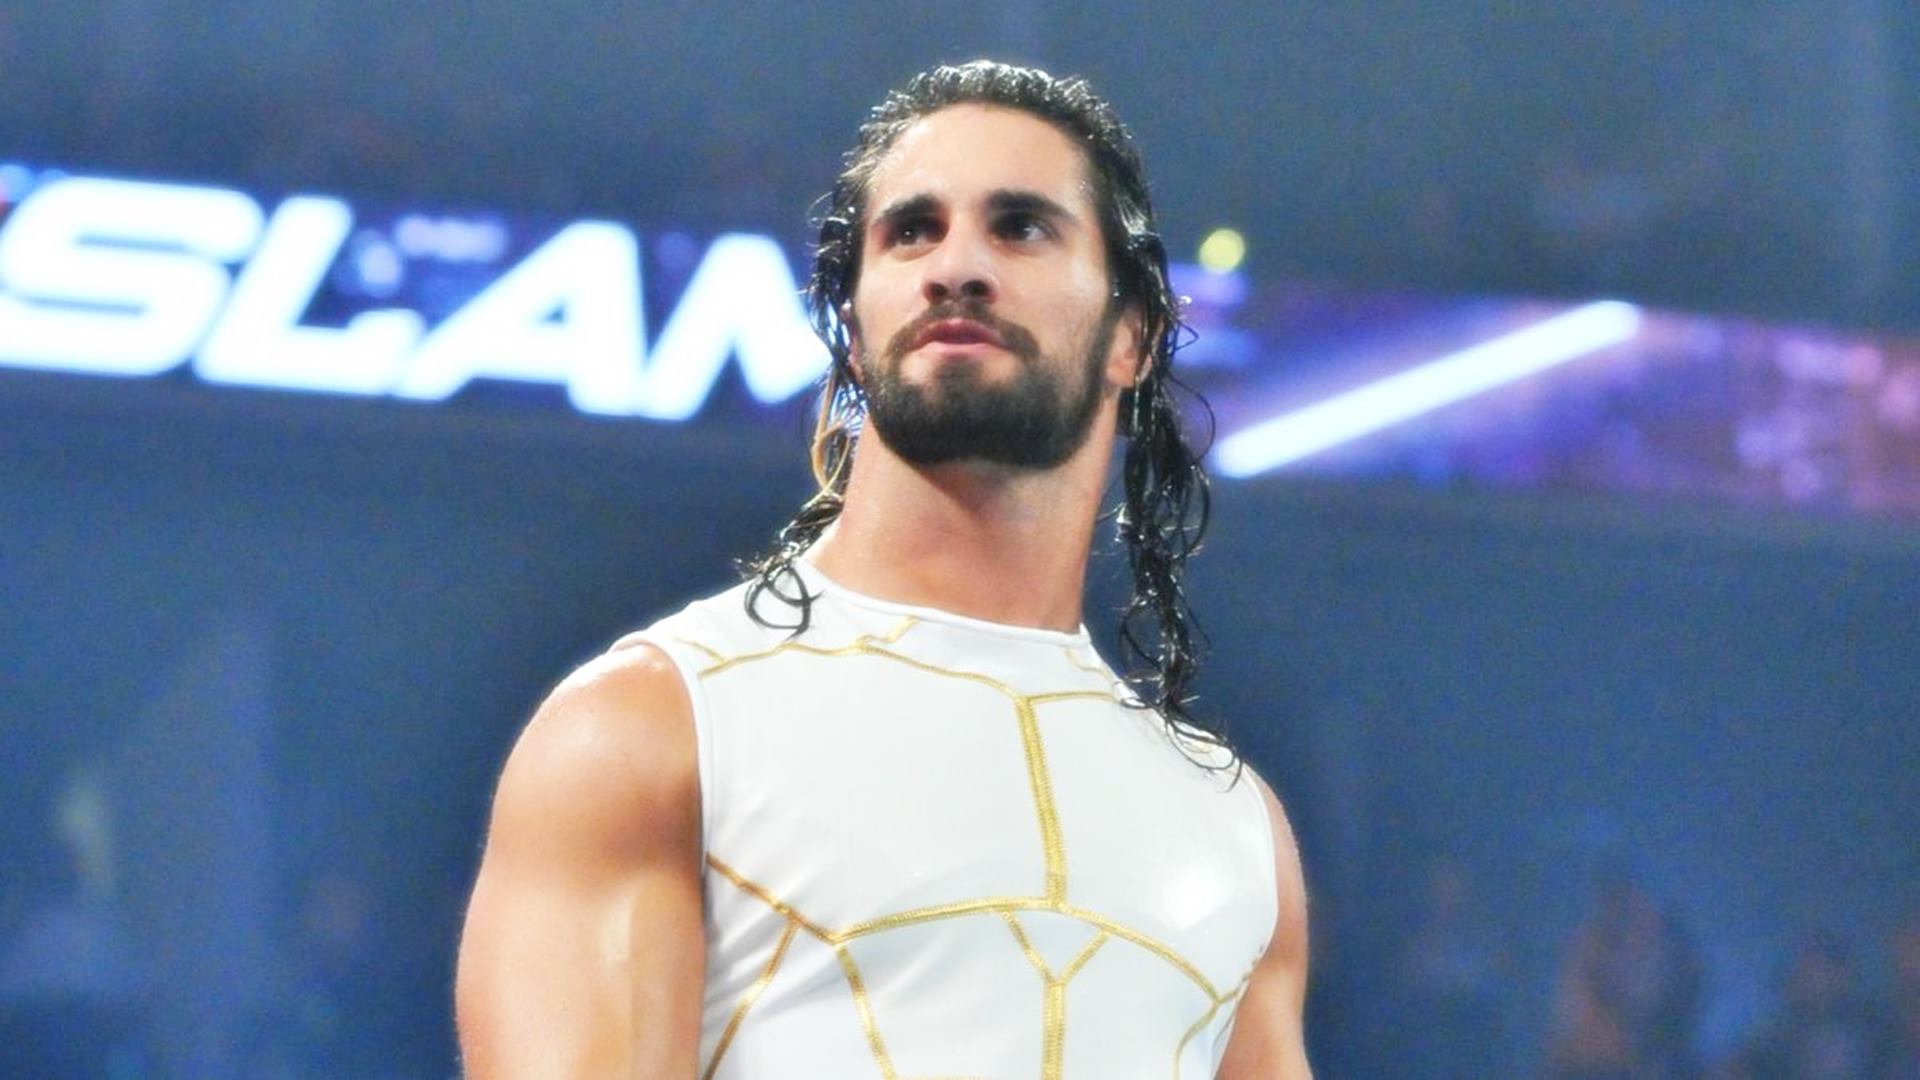 Seth Rollins Hd Wallpapers - Seth Rollins Images Hd , HD Wallpaper & Backgrounds